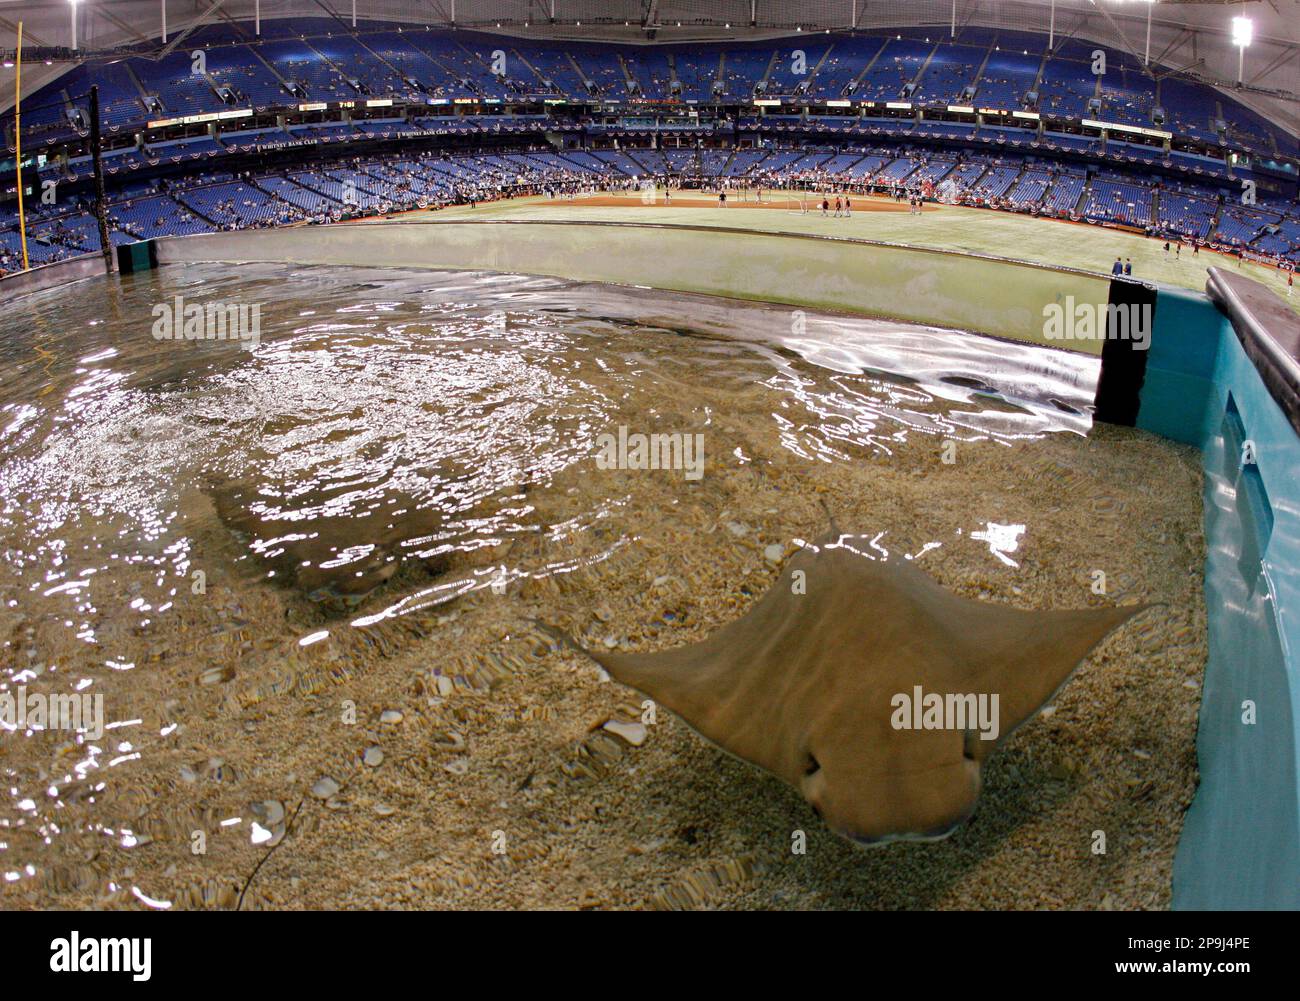 A Devil Ray swims in a fish tank in right field at Tropicana Field